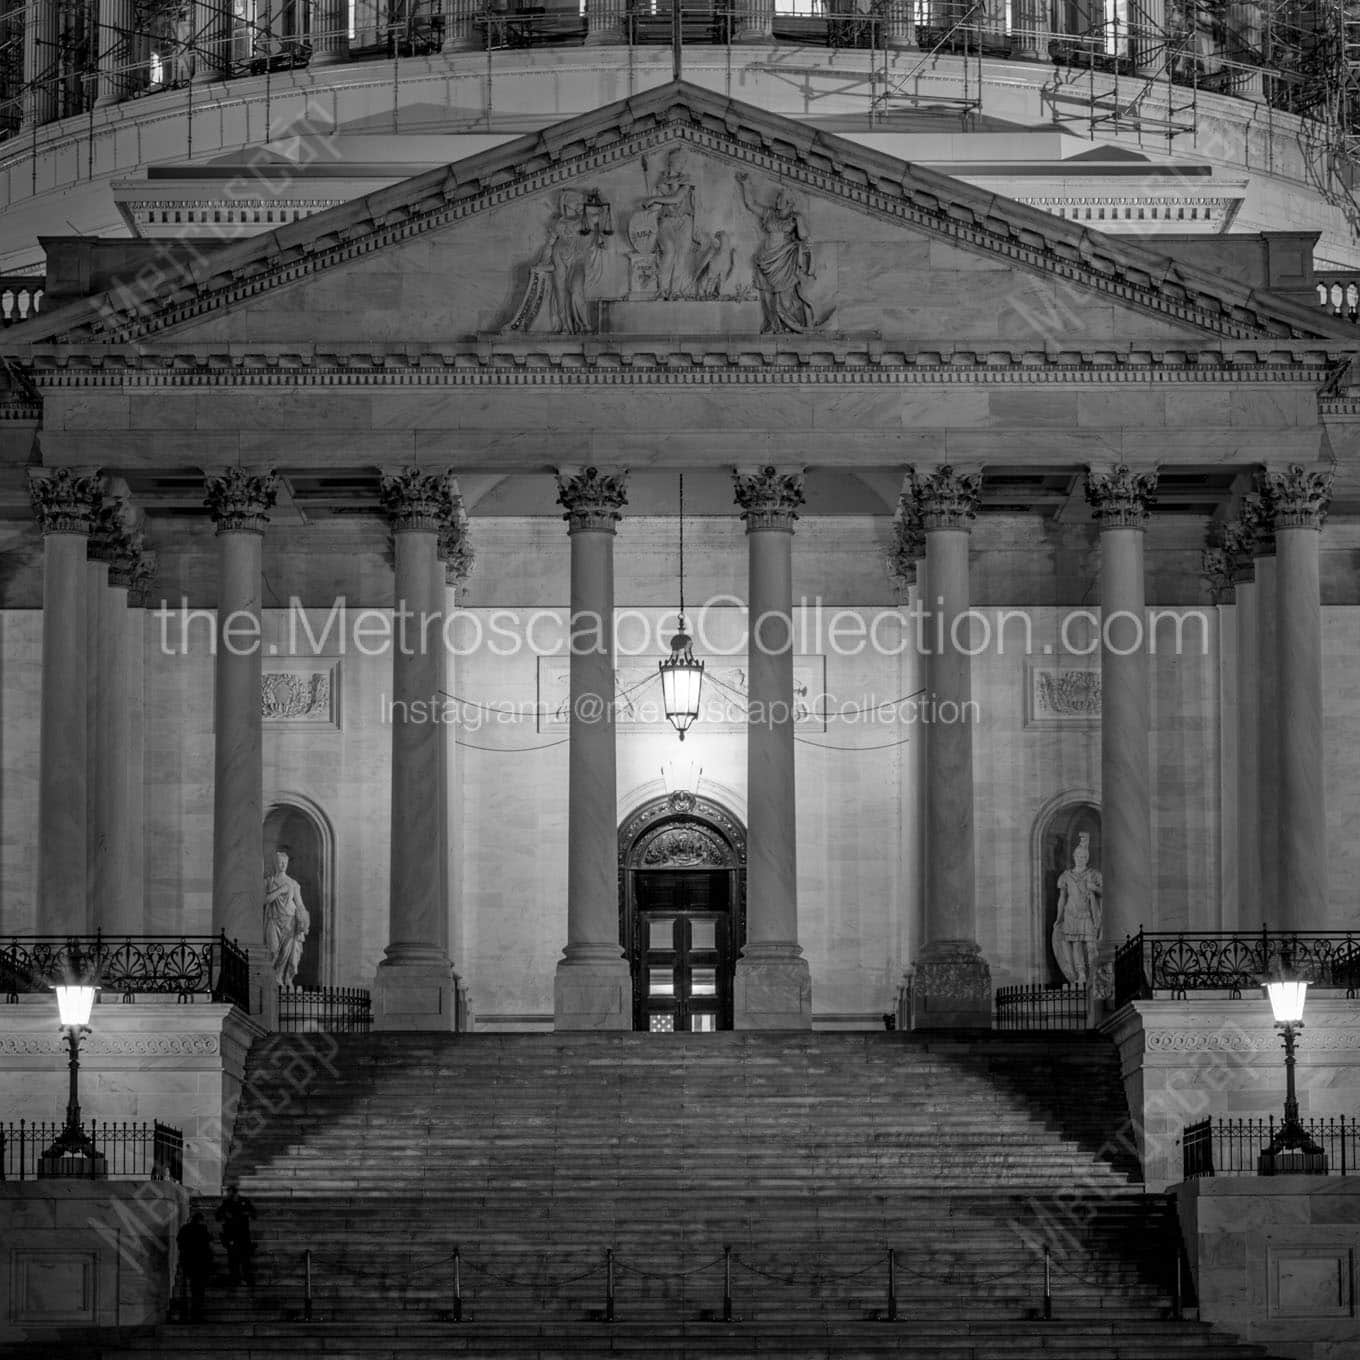 east side us capitol building at night Black & White Wall Art